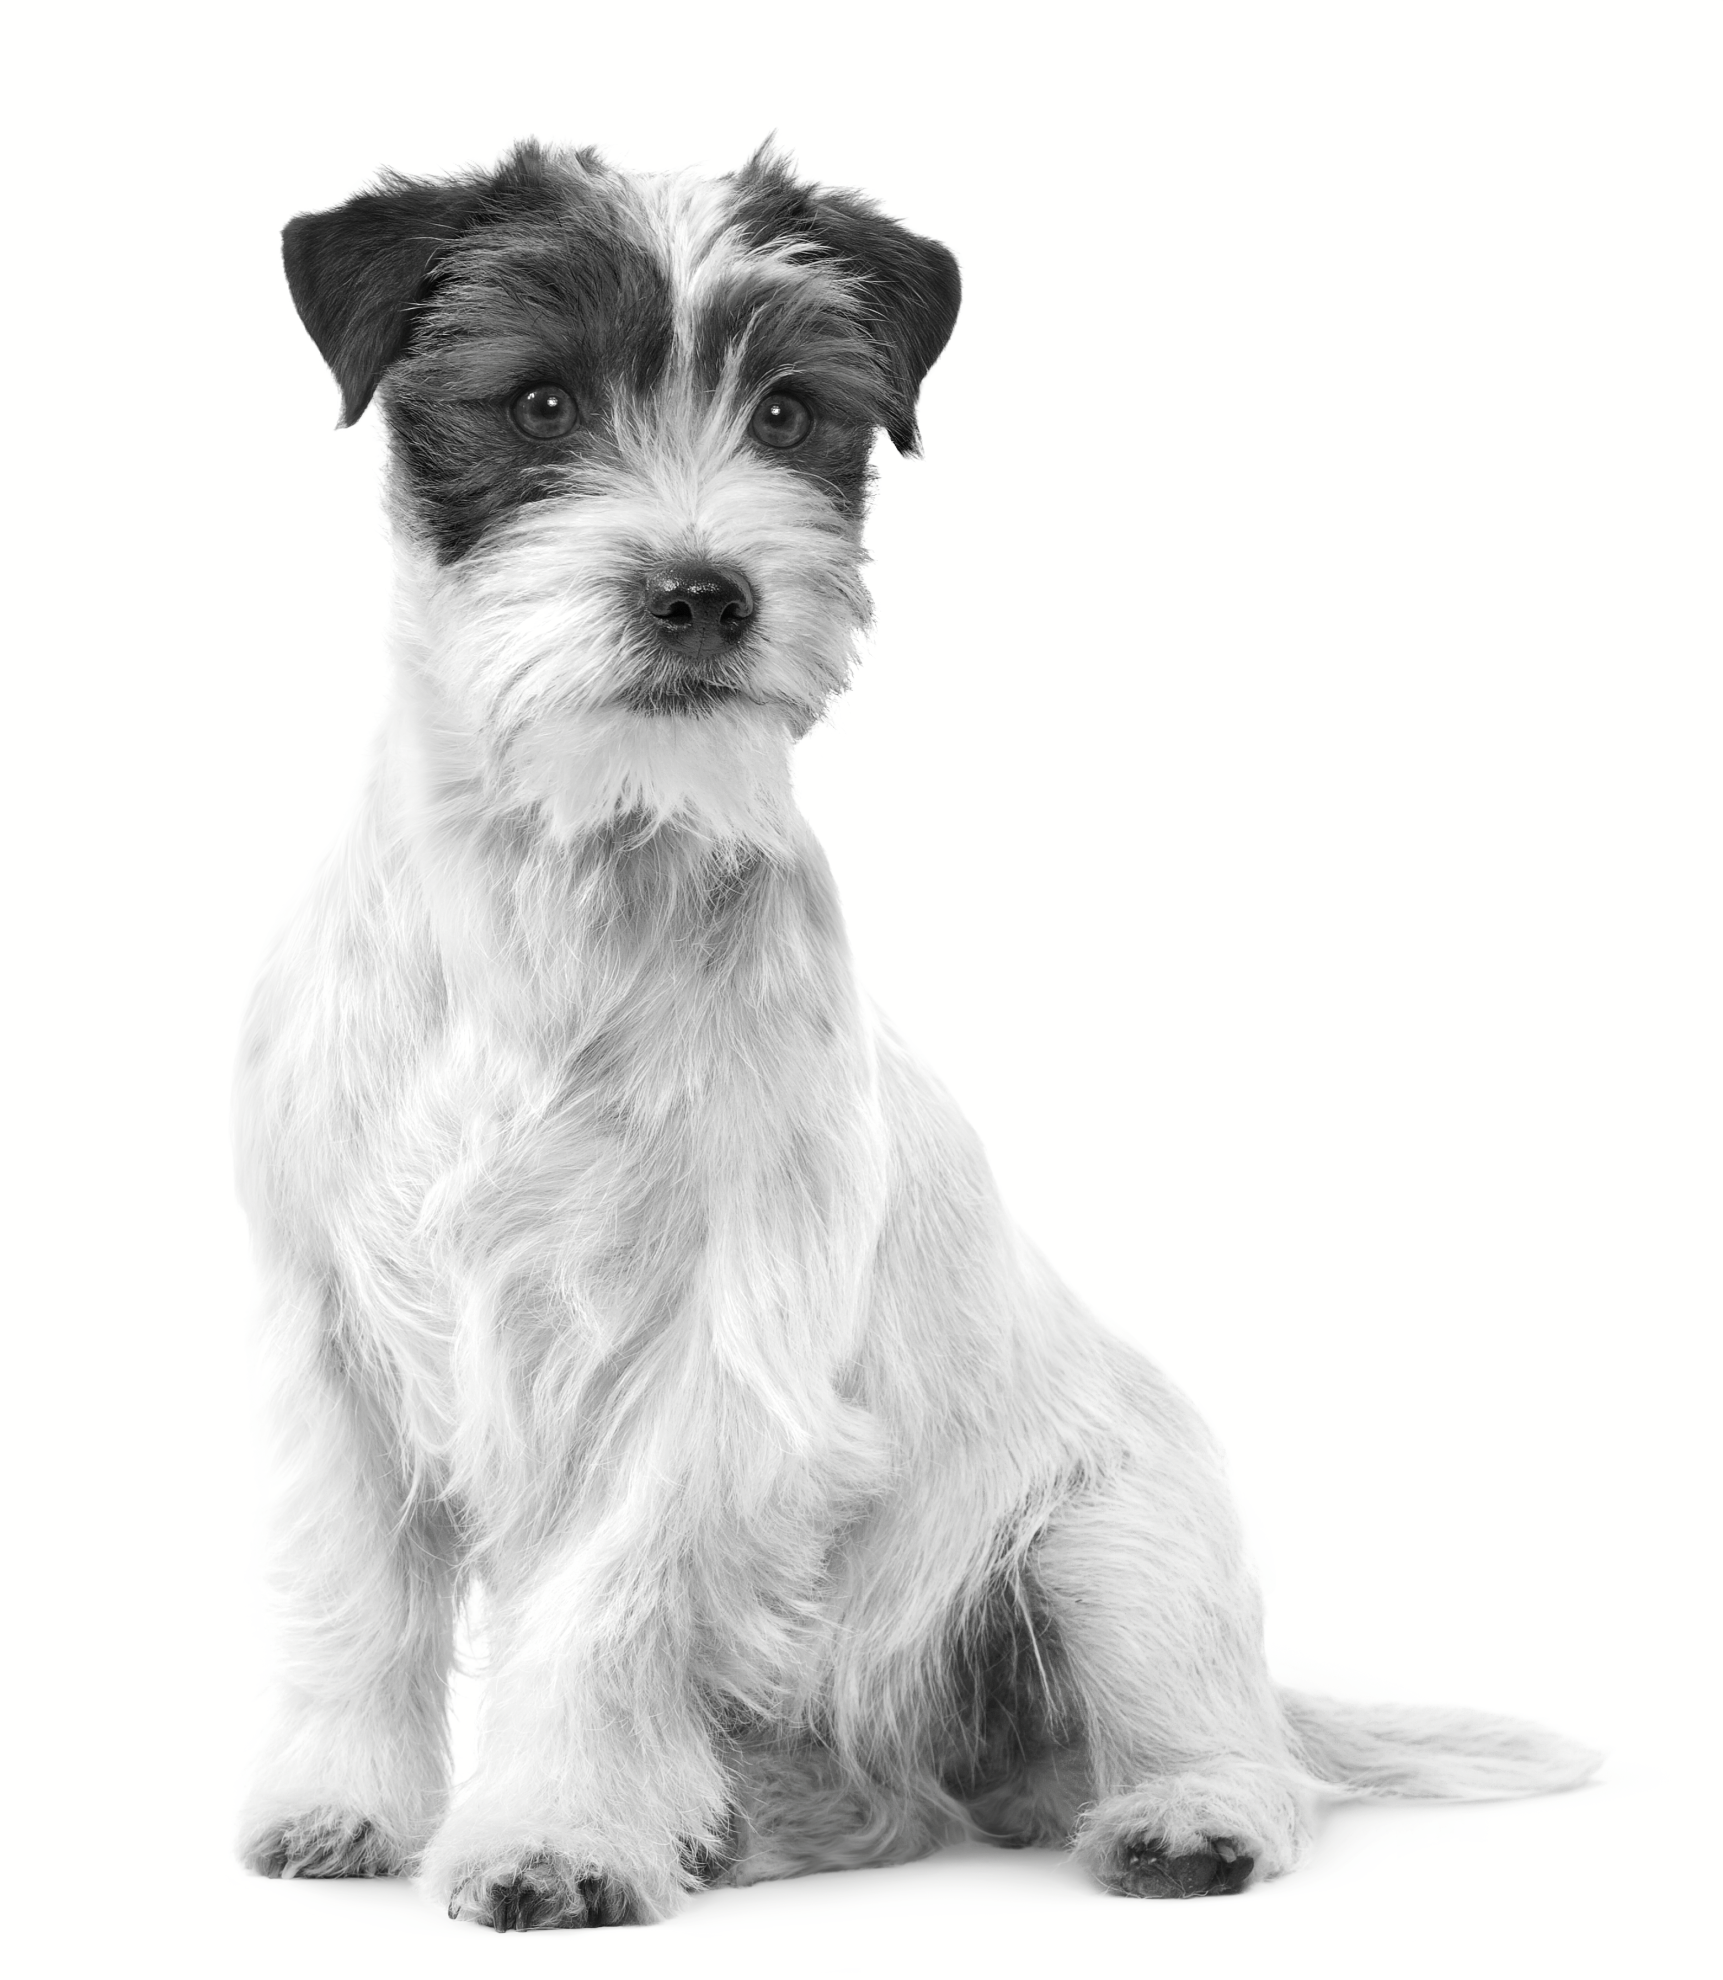 Jack Russell adult sitting in black and white on a white background